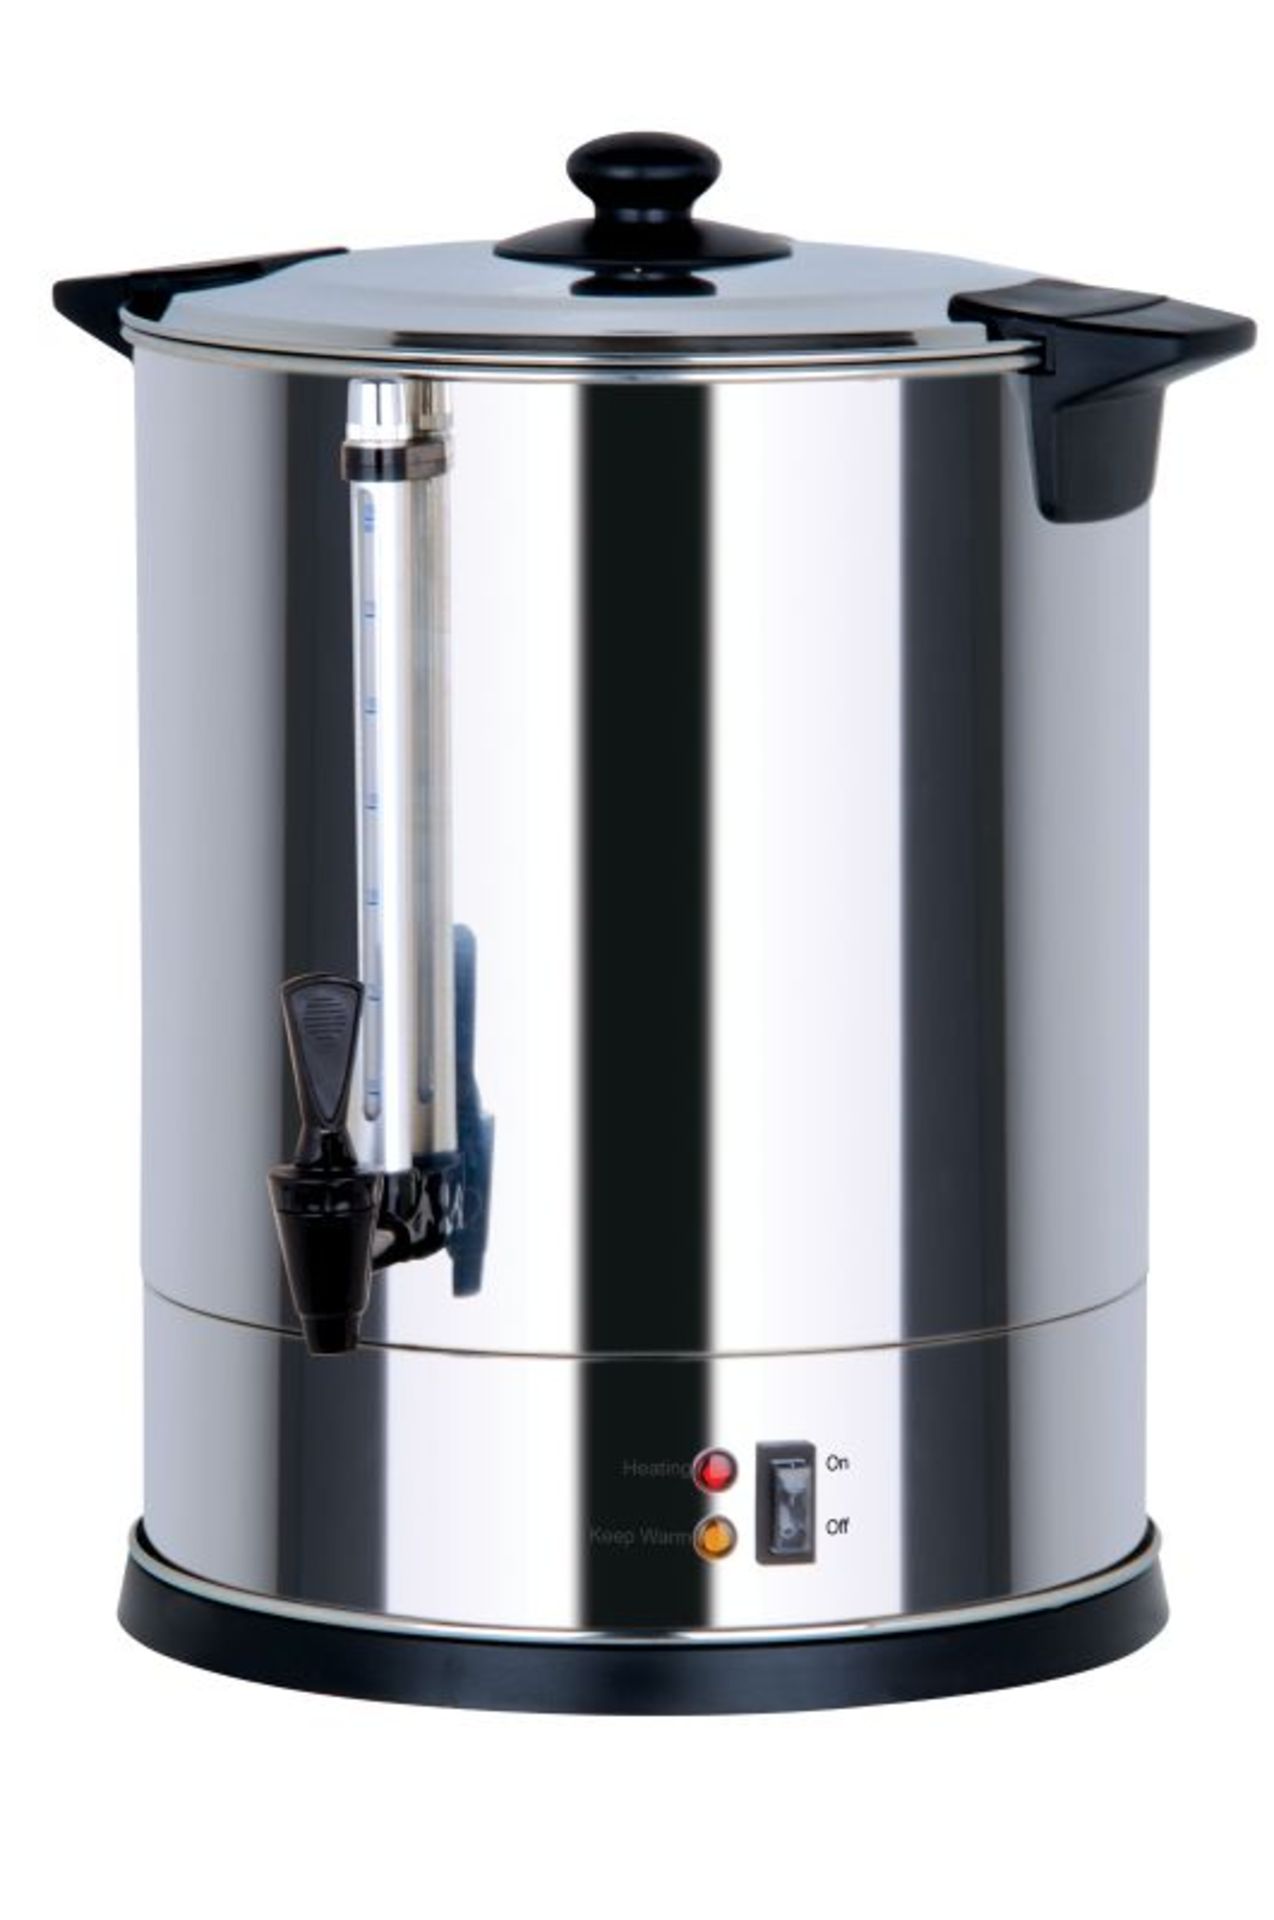 V Grade U Switch On Professional Series 20 Litre Hot Water Urn with Safety Cut Out